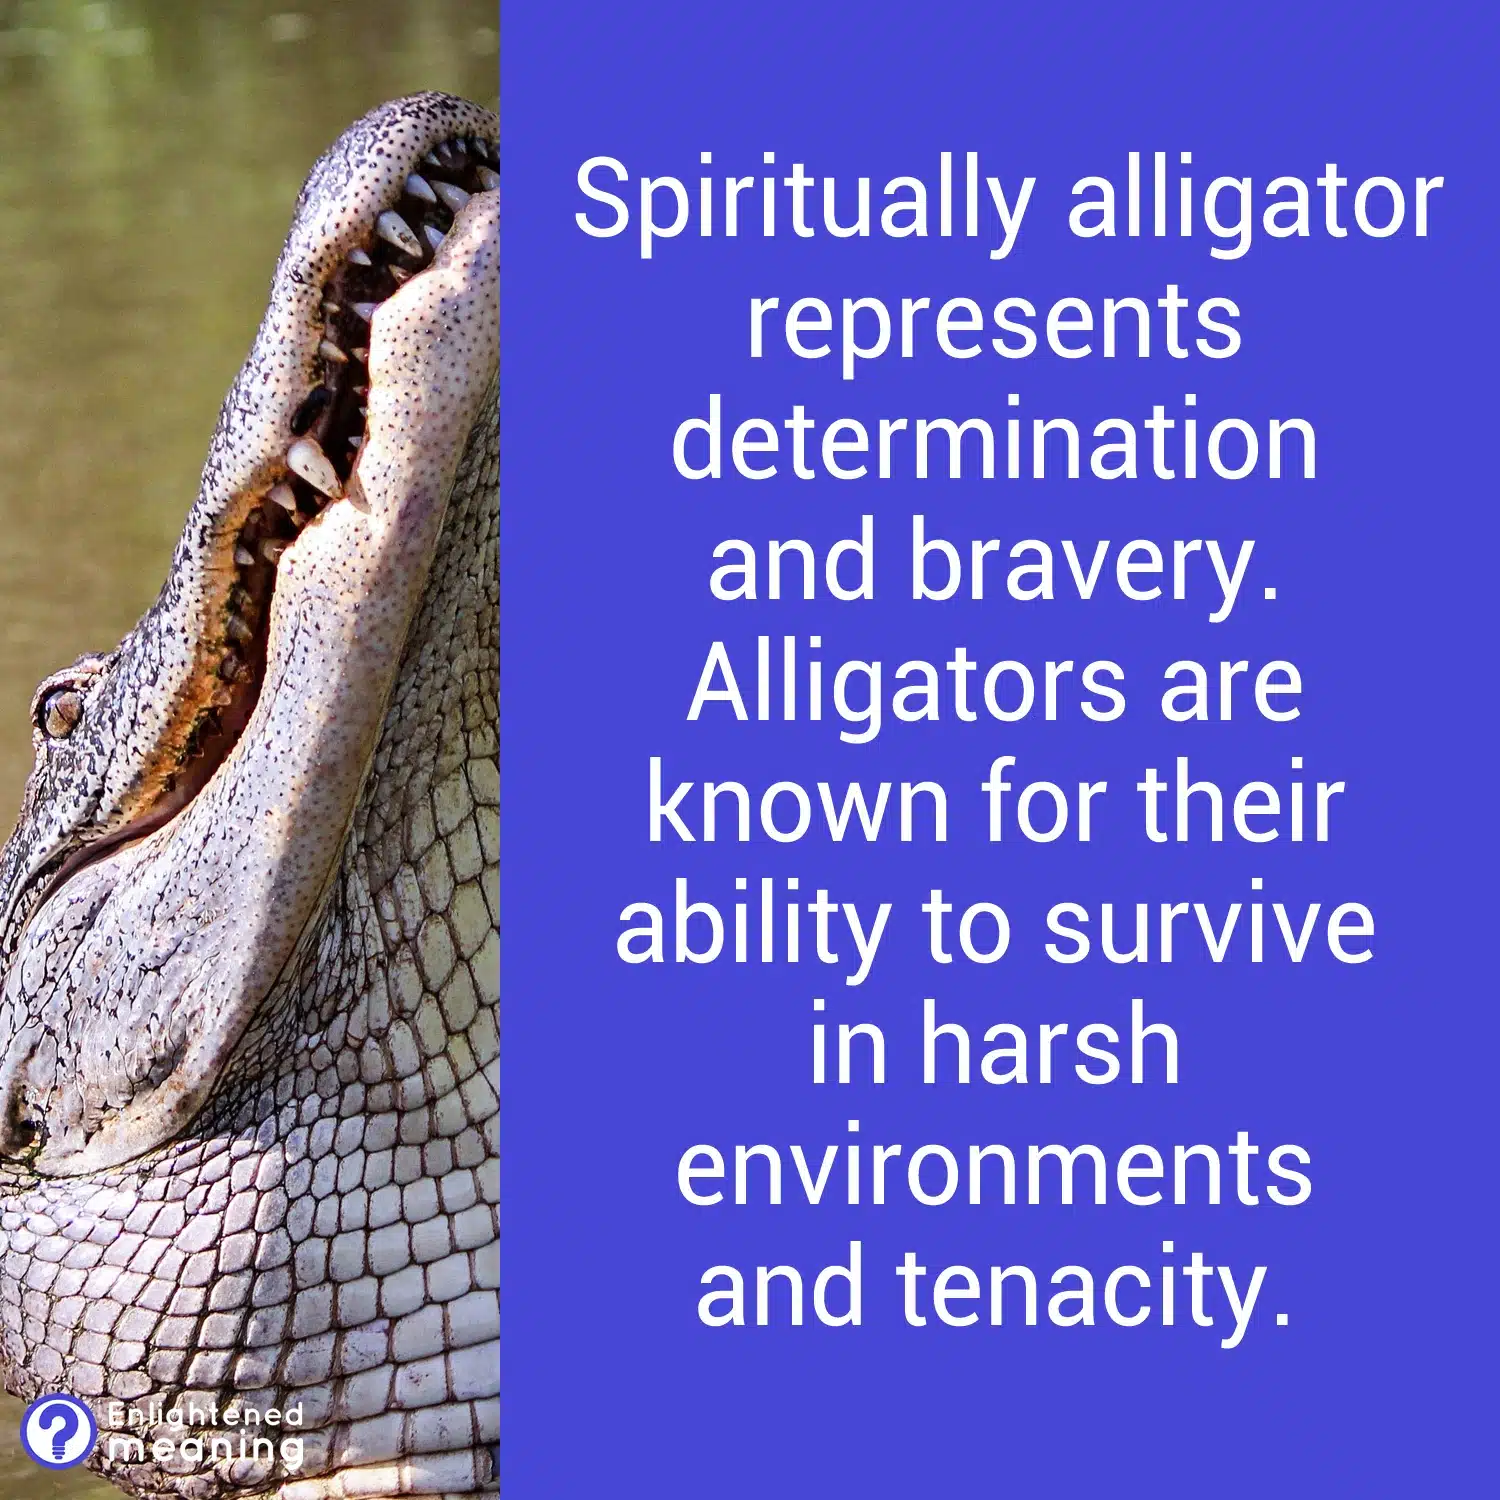 What does an alligator represent spiritually